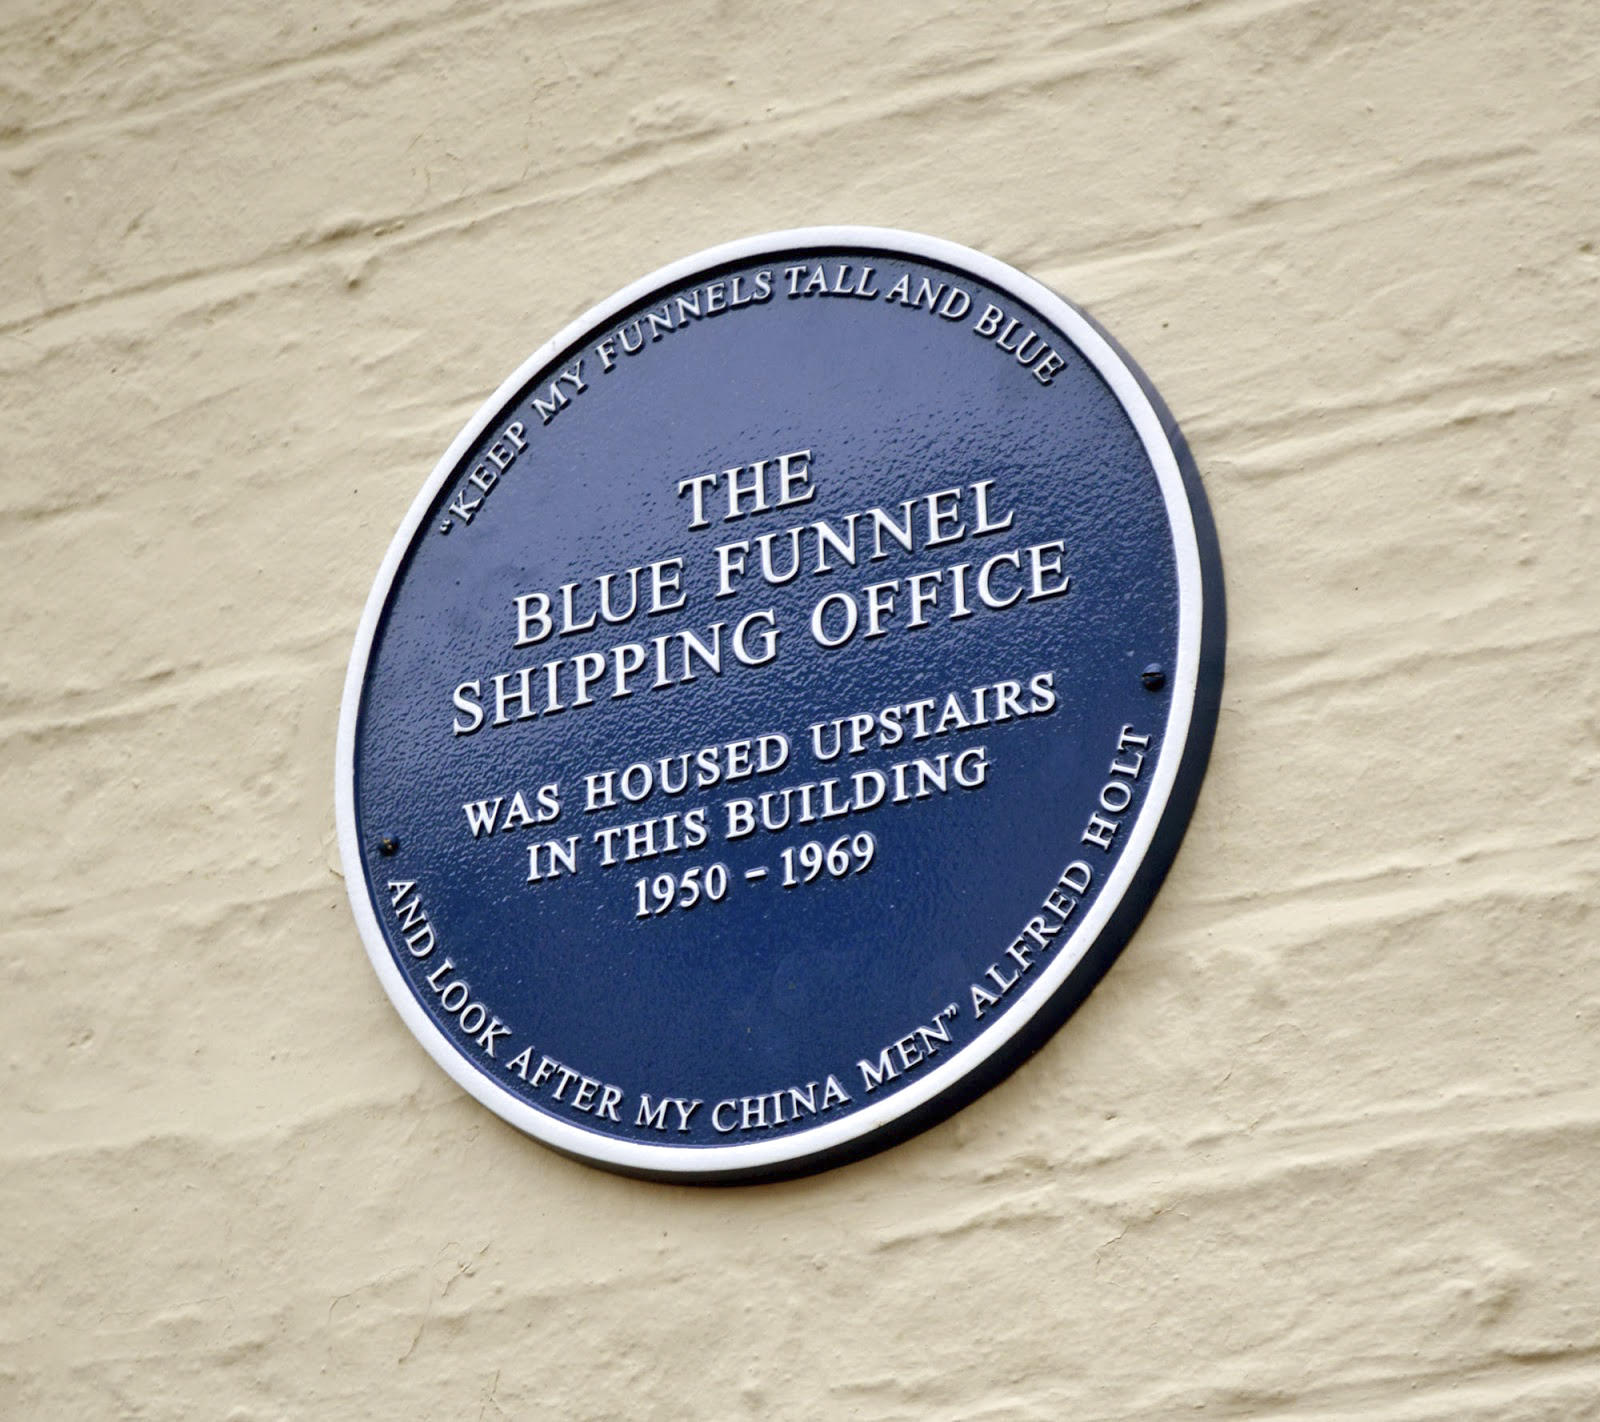 A plaque commemorating Chinese seamen who worked for the Blue Funnel shipping company, on Nelson Street, Liverpool. Photo: P.H. Chan